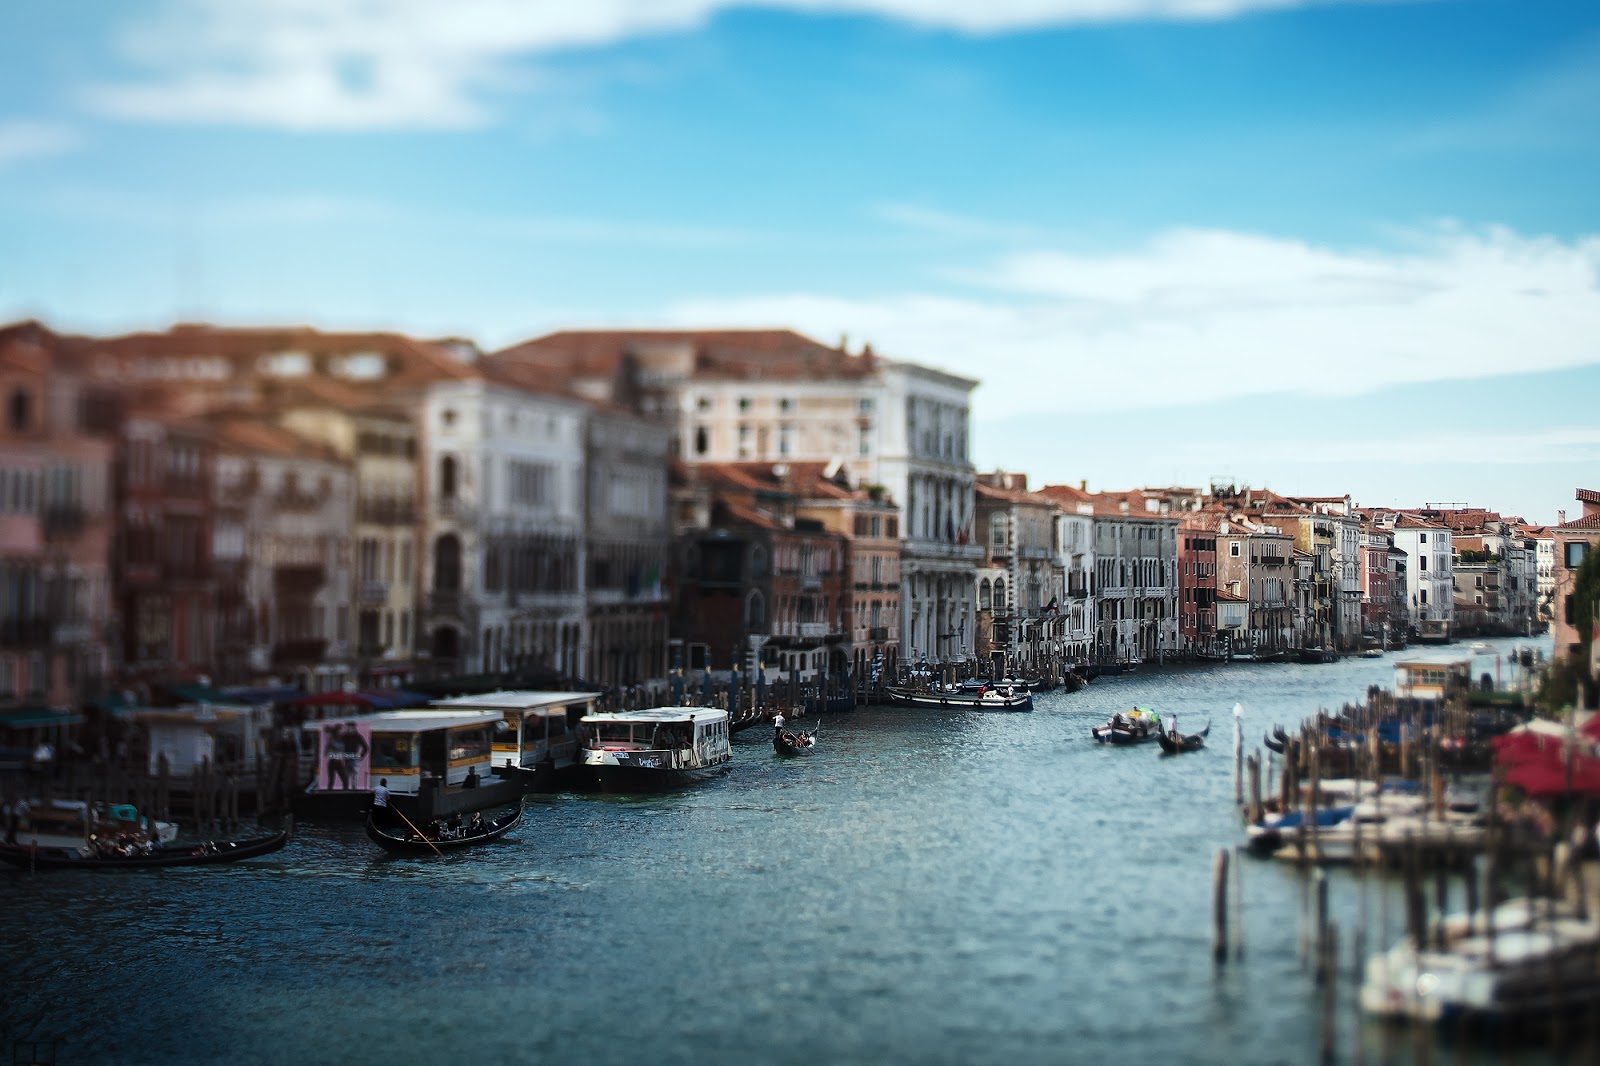 lensbaby image of the rialto bridge by willie kers